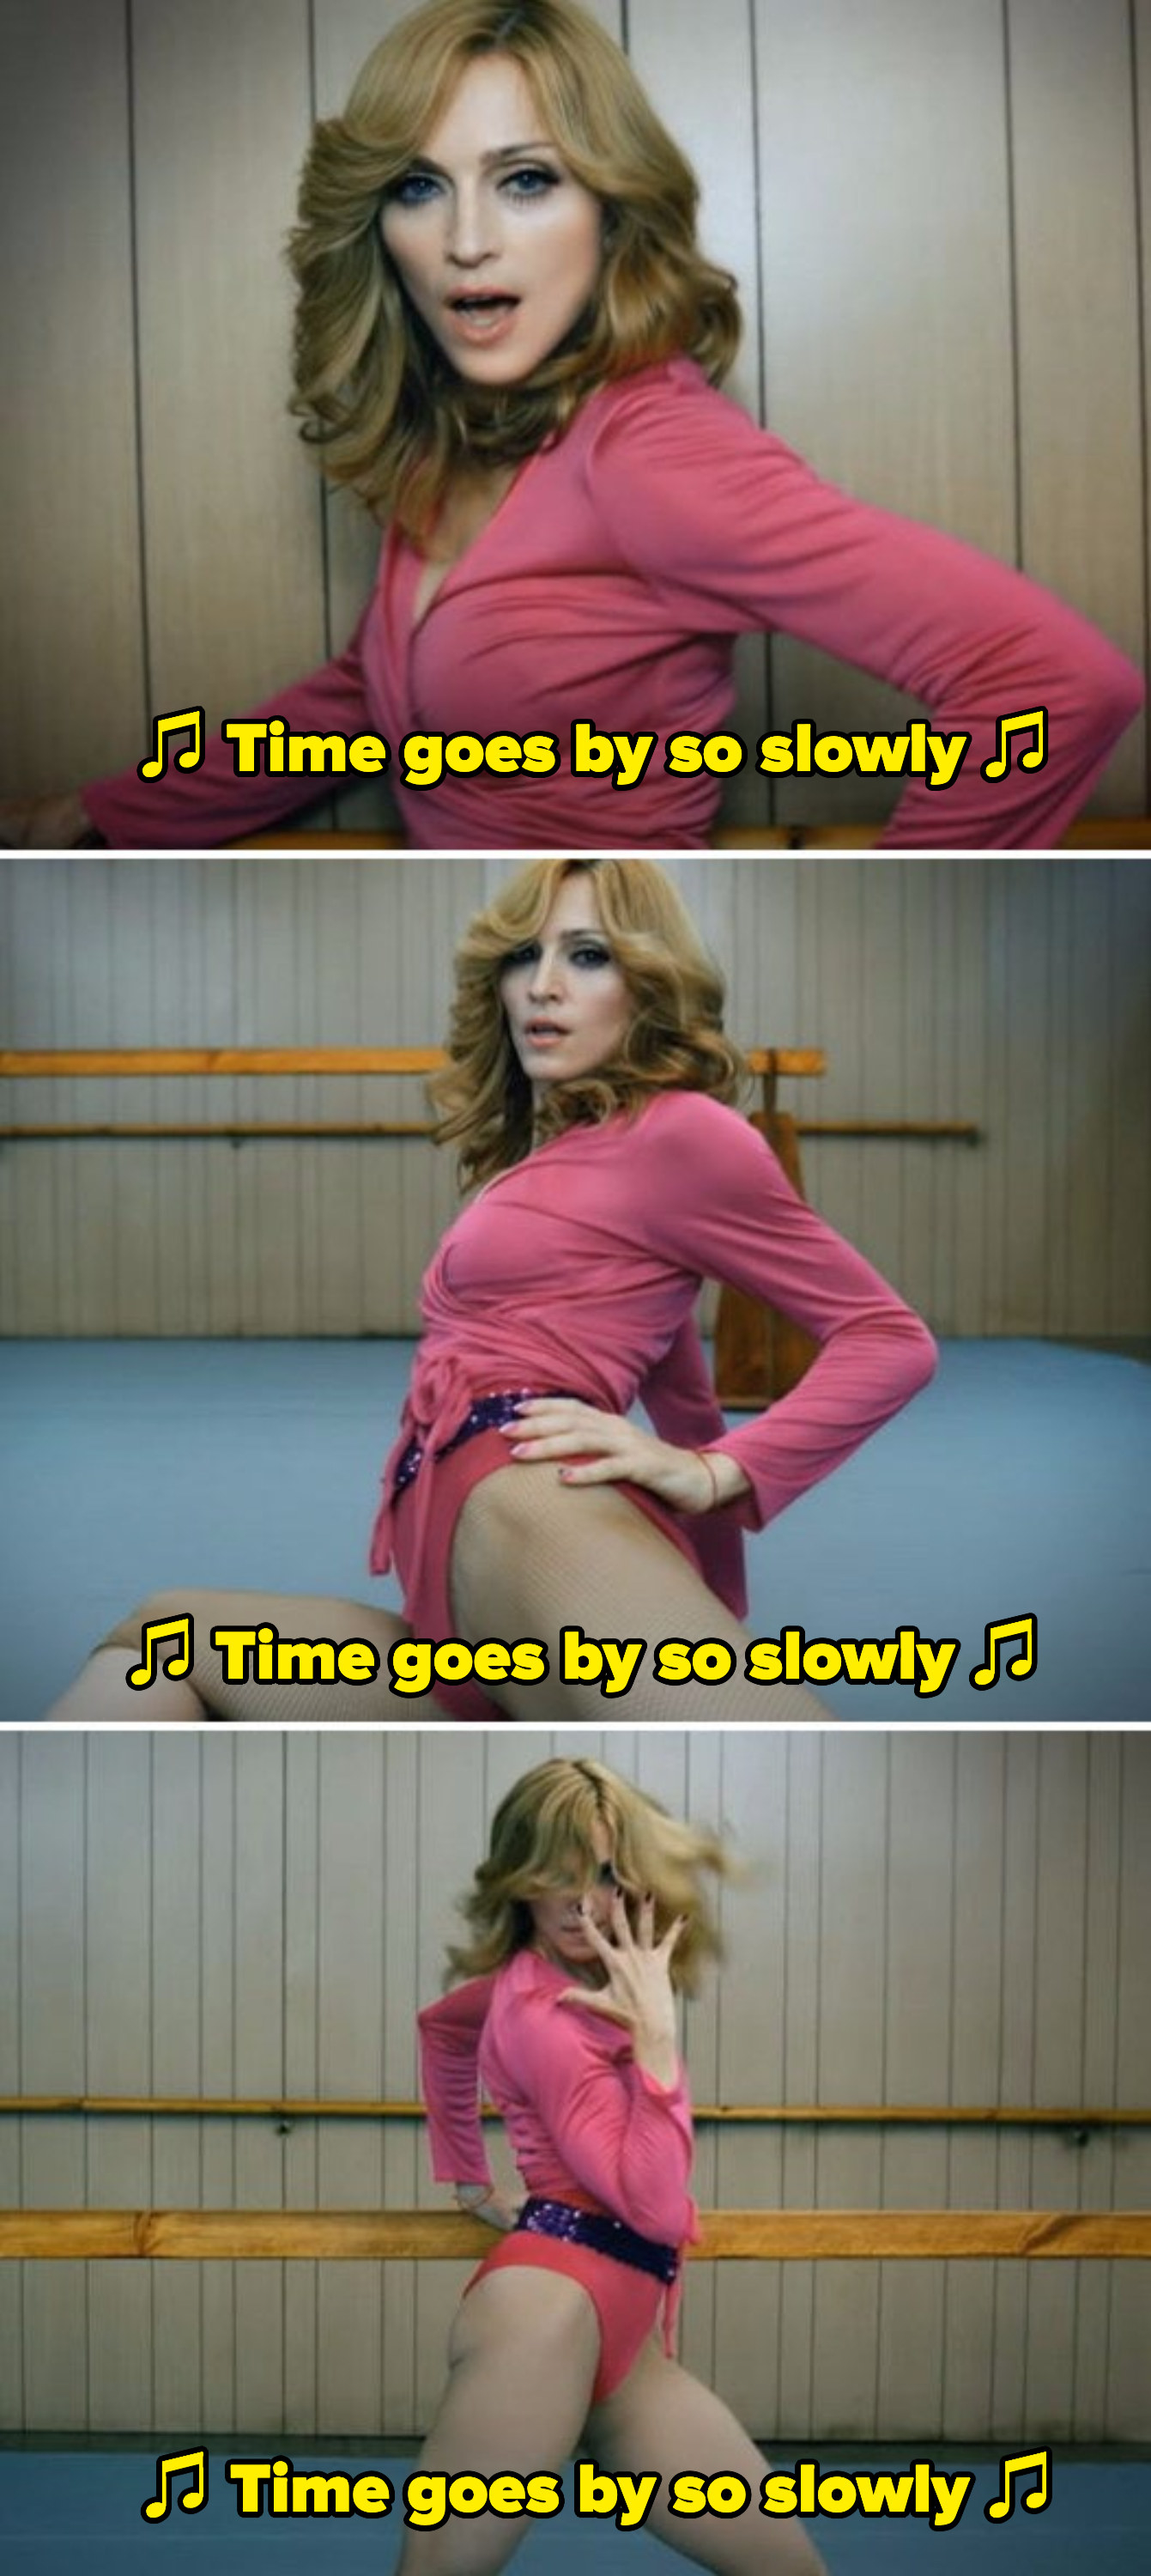 Madonna singing &quot;Time goes by so slowly&quot; in various dance shots in her &quot;Hung Up&quot; music video